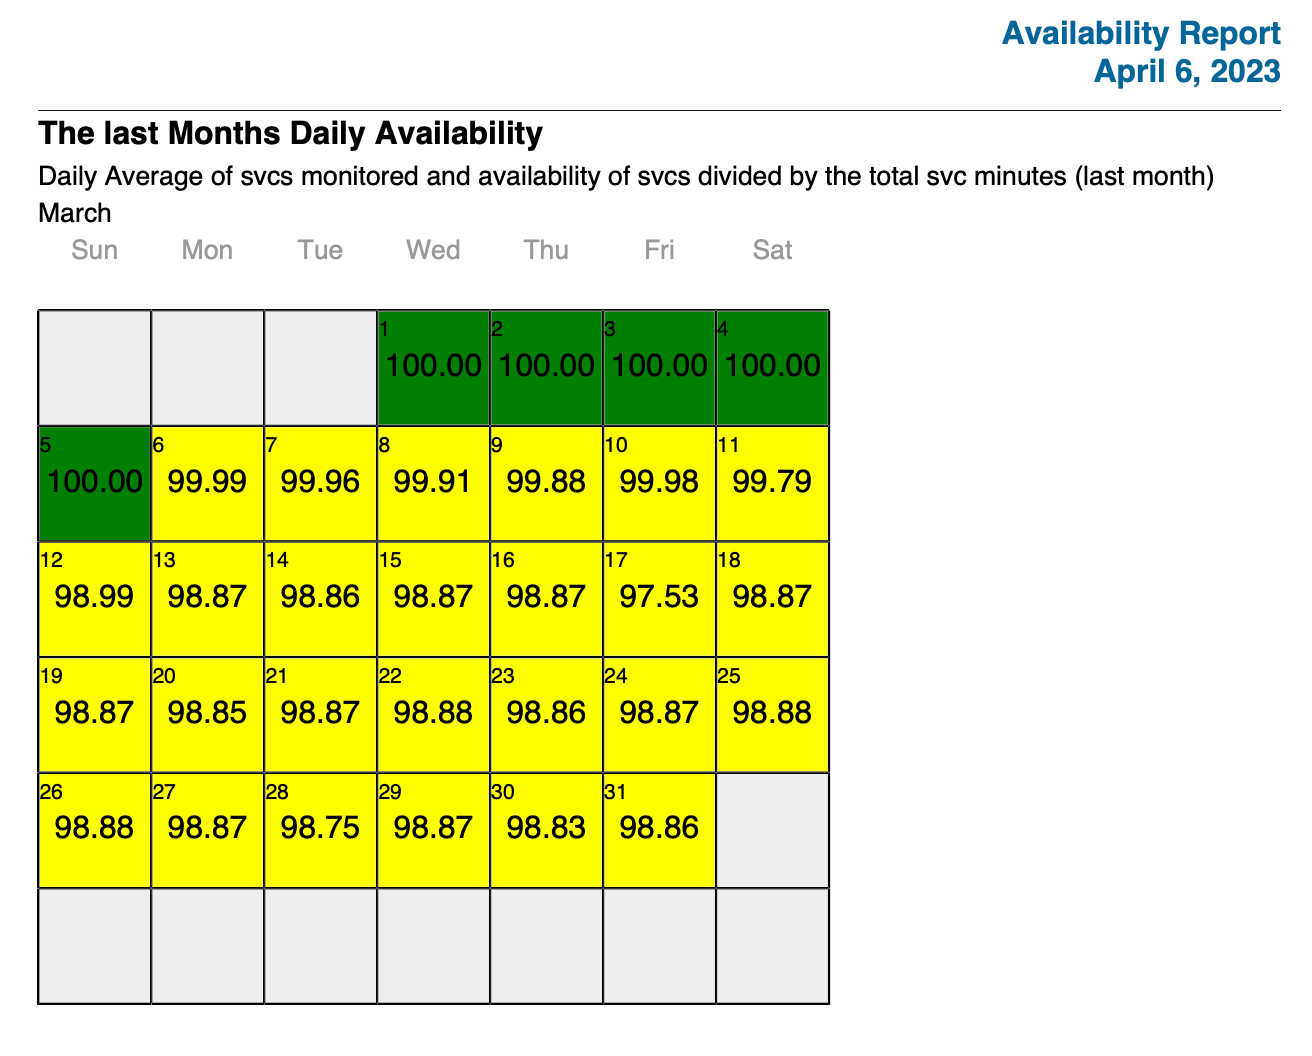 Example of the second page of a default calendar report. Availability statistics for the previous month (March) are displayed in a calendar format. Dates with full availability are colored green, and others are yellow.